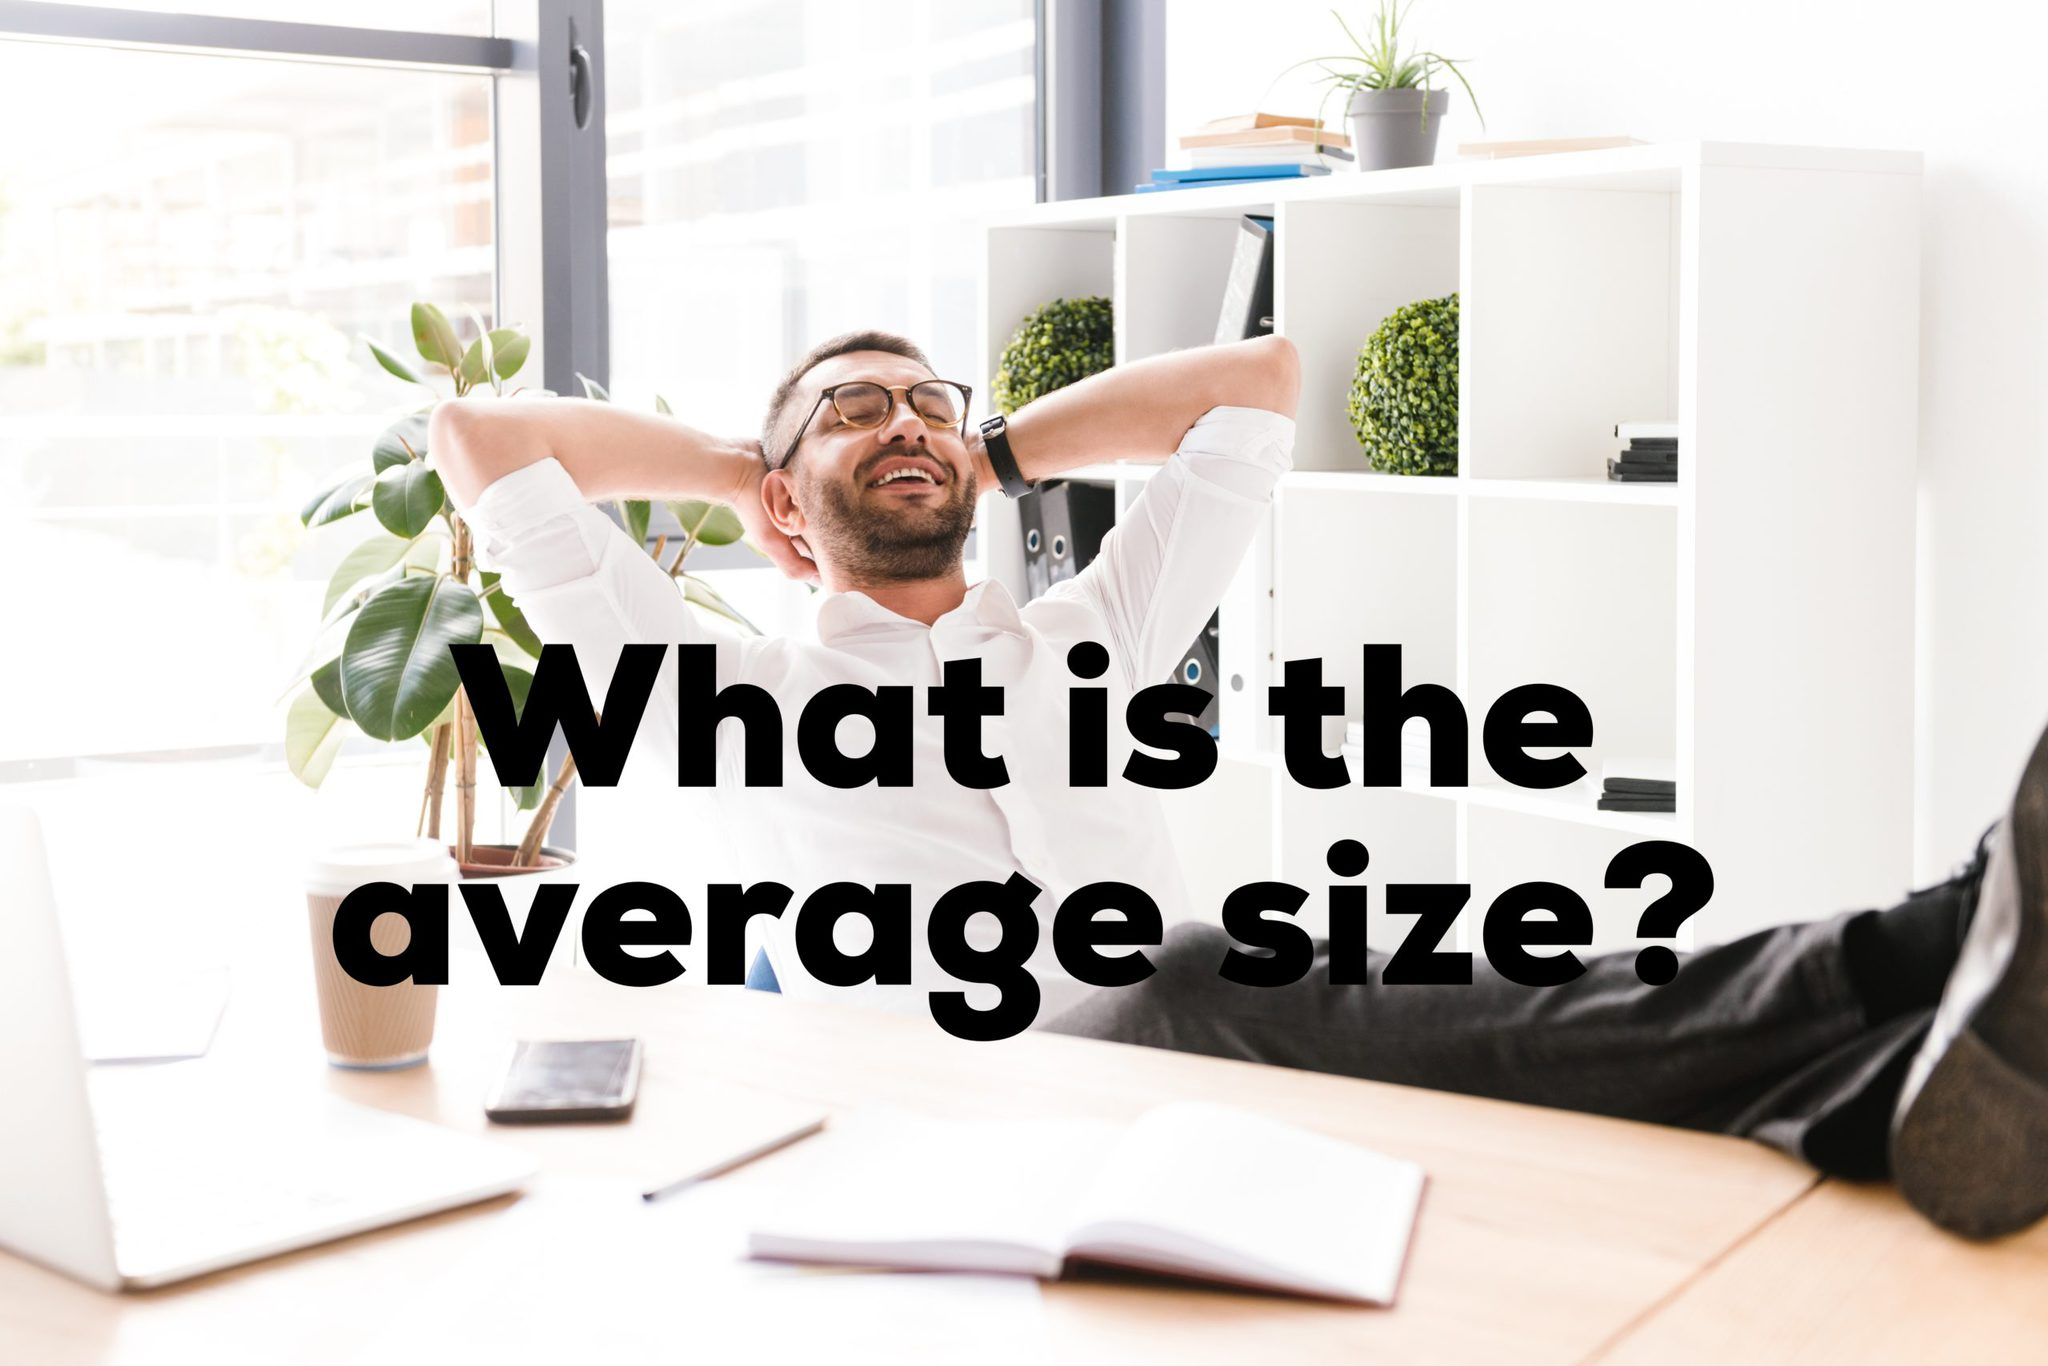 What is the average size penis